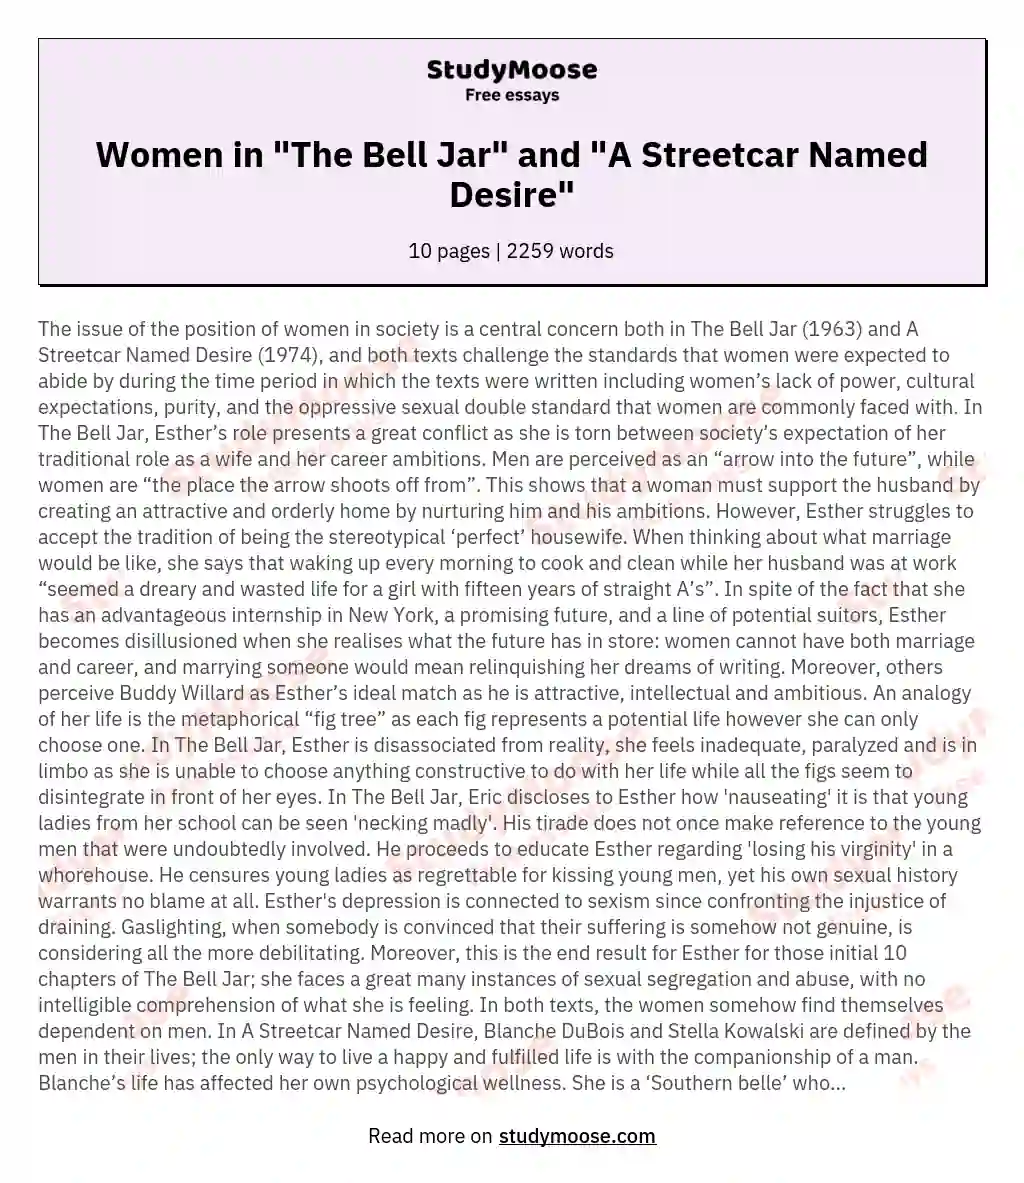 Women in "The Bell Jar" and "A Streetcar Named Desire"